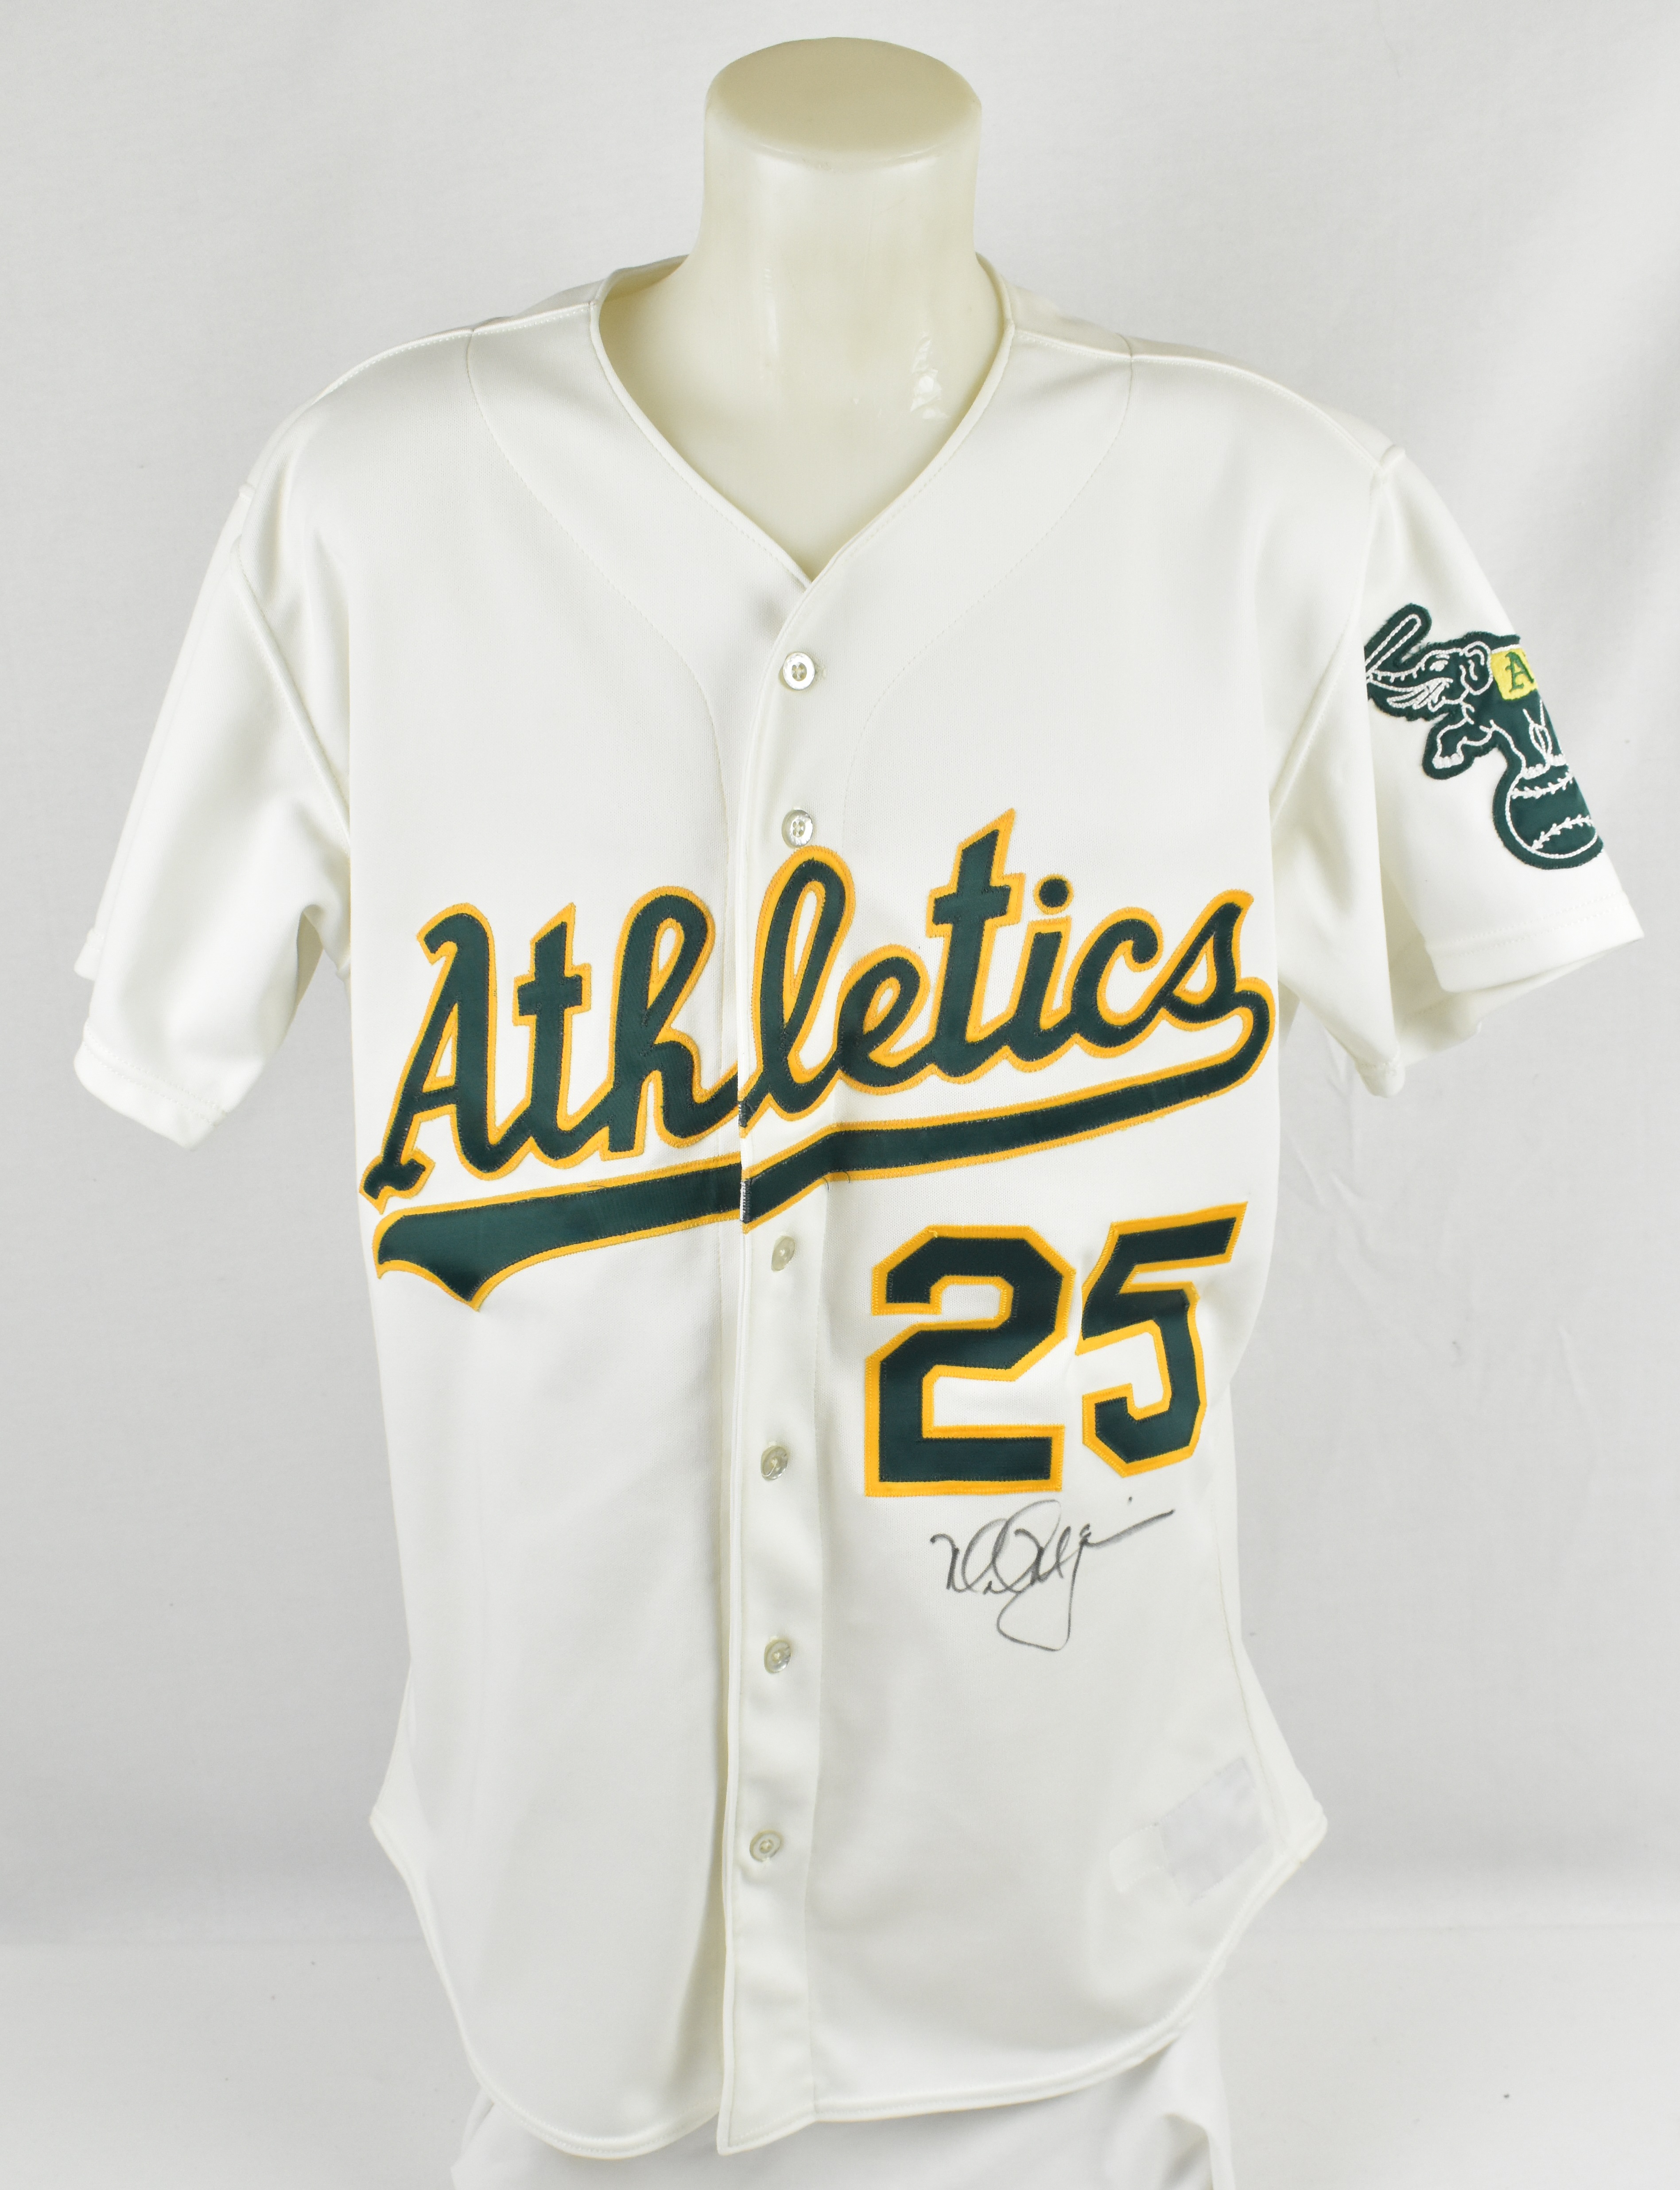 Mark McGwire 1995 Oakland A's Game Worn Jersey